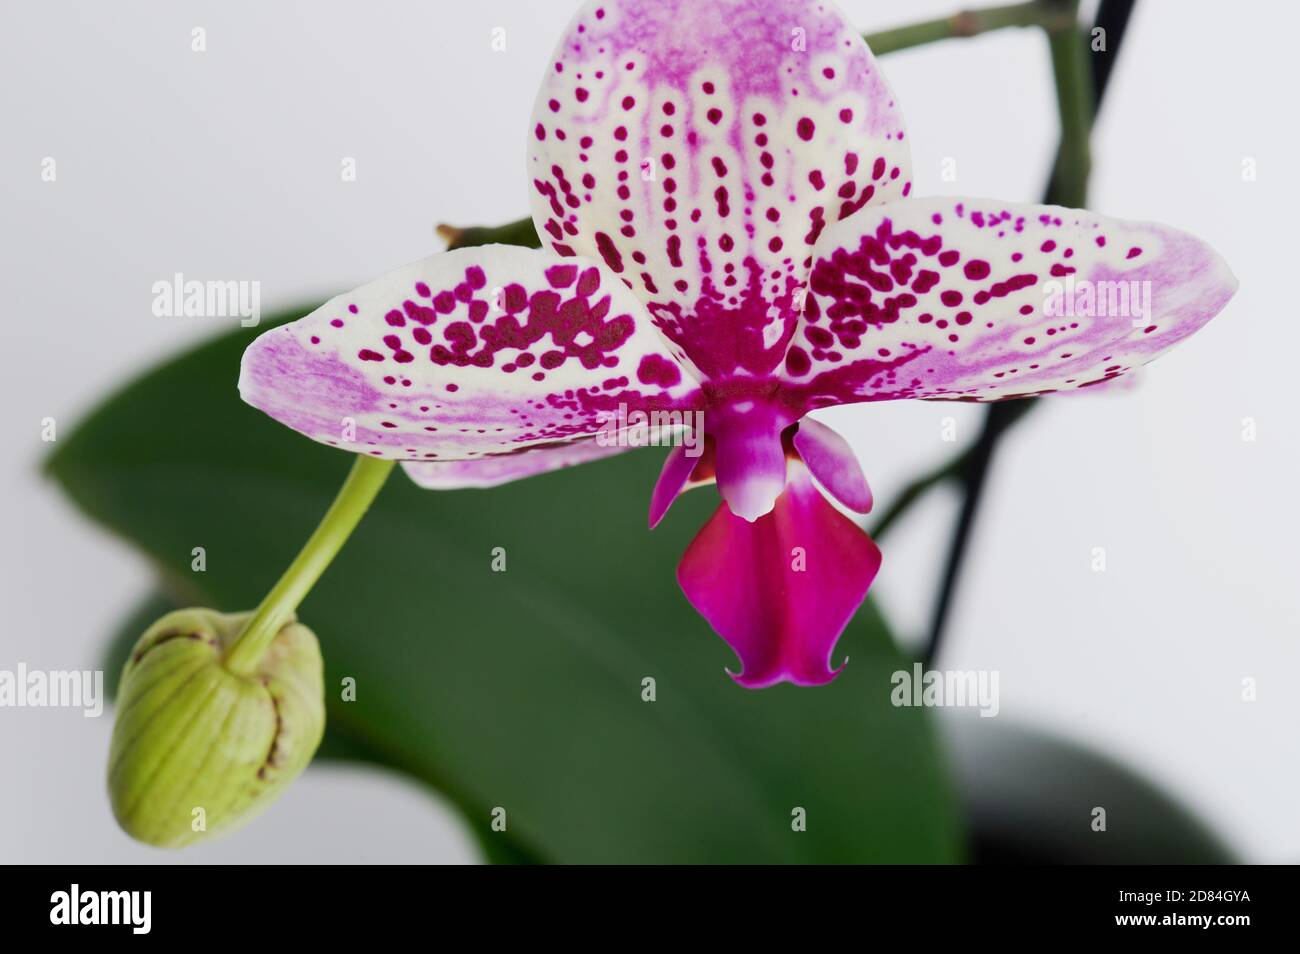 Orchid flower plant macro close up view on studio background Stock Photo